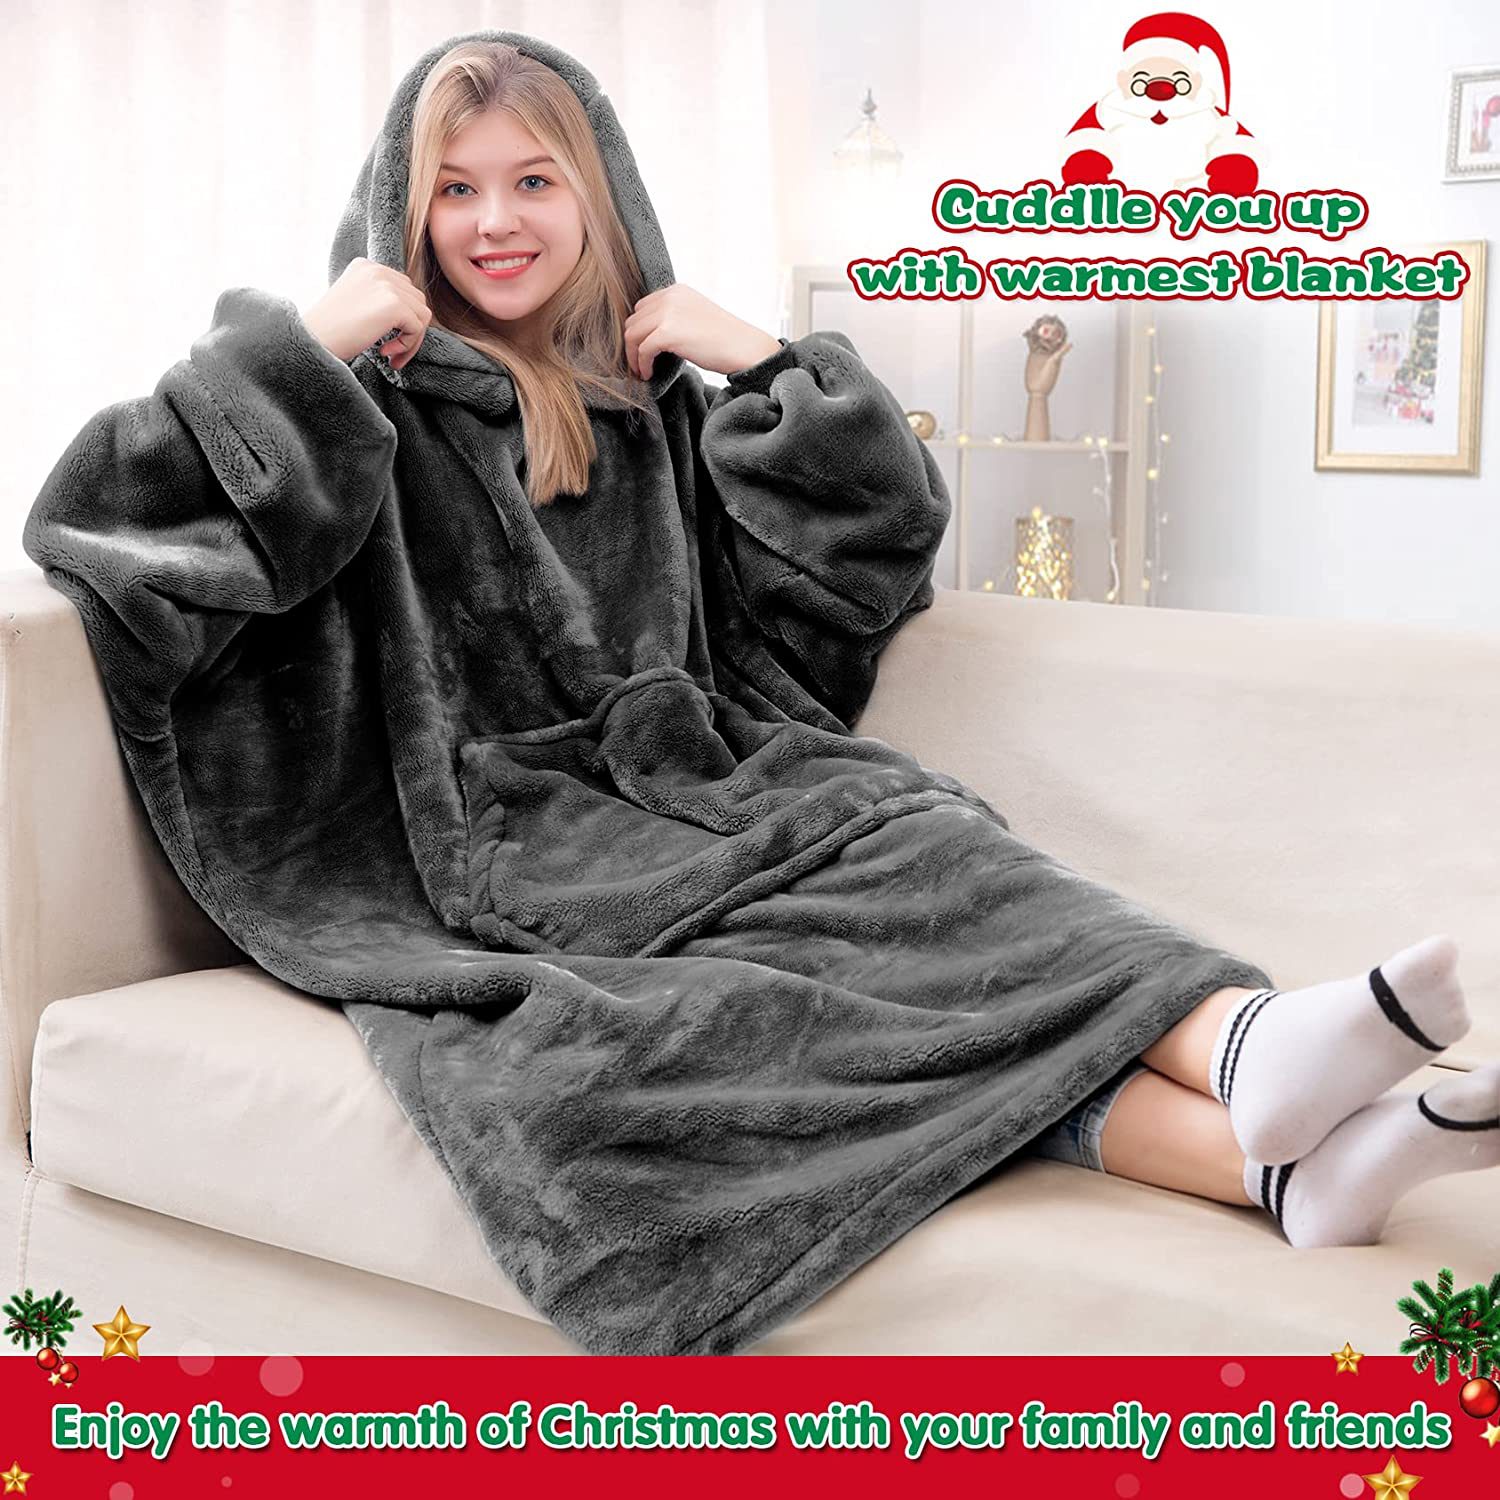 Waitu Wearable Blanket Sweatshirt for Women and Men, Super Warm and Cozy Giant Blanket Hoodie, Thick Flannel Blanket with Sleeves and Giant Pocket - Dark Gray